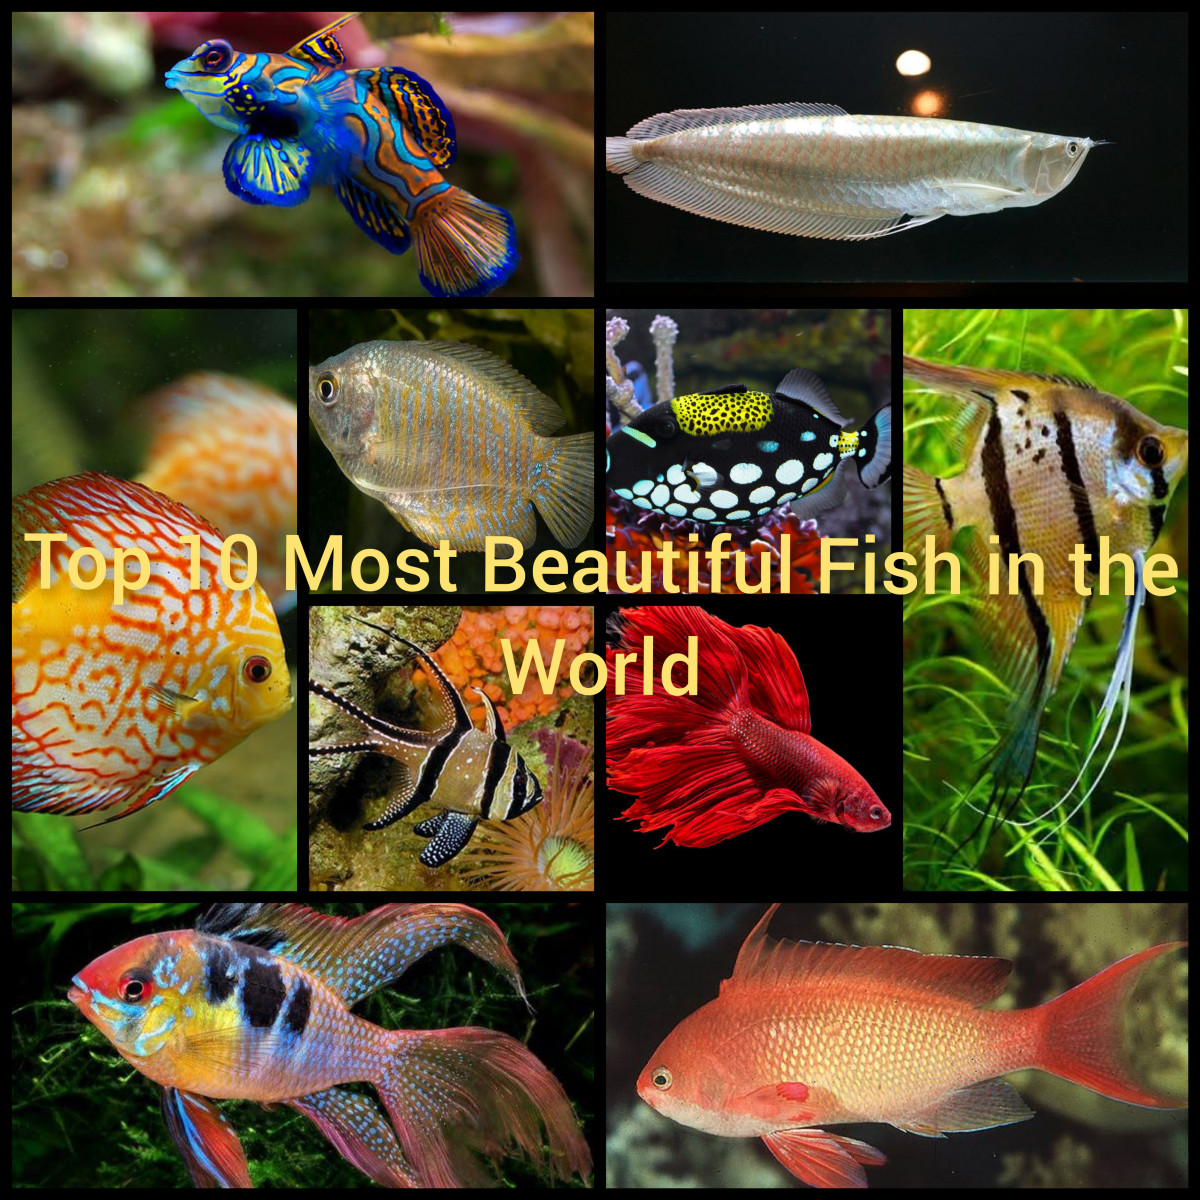 Top 10 Most Beautiful Fish in the World